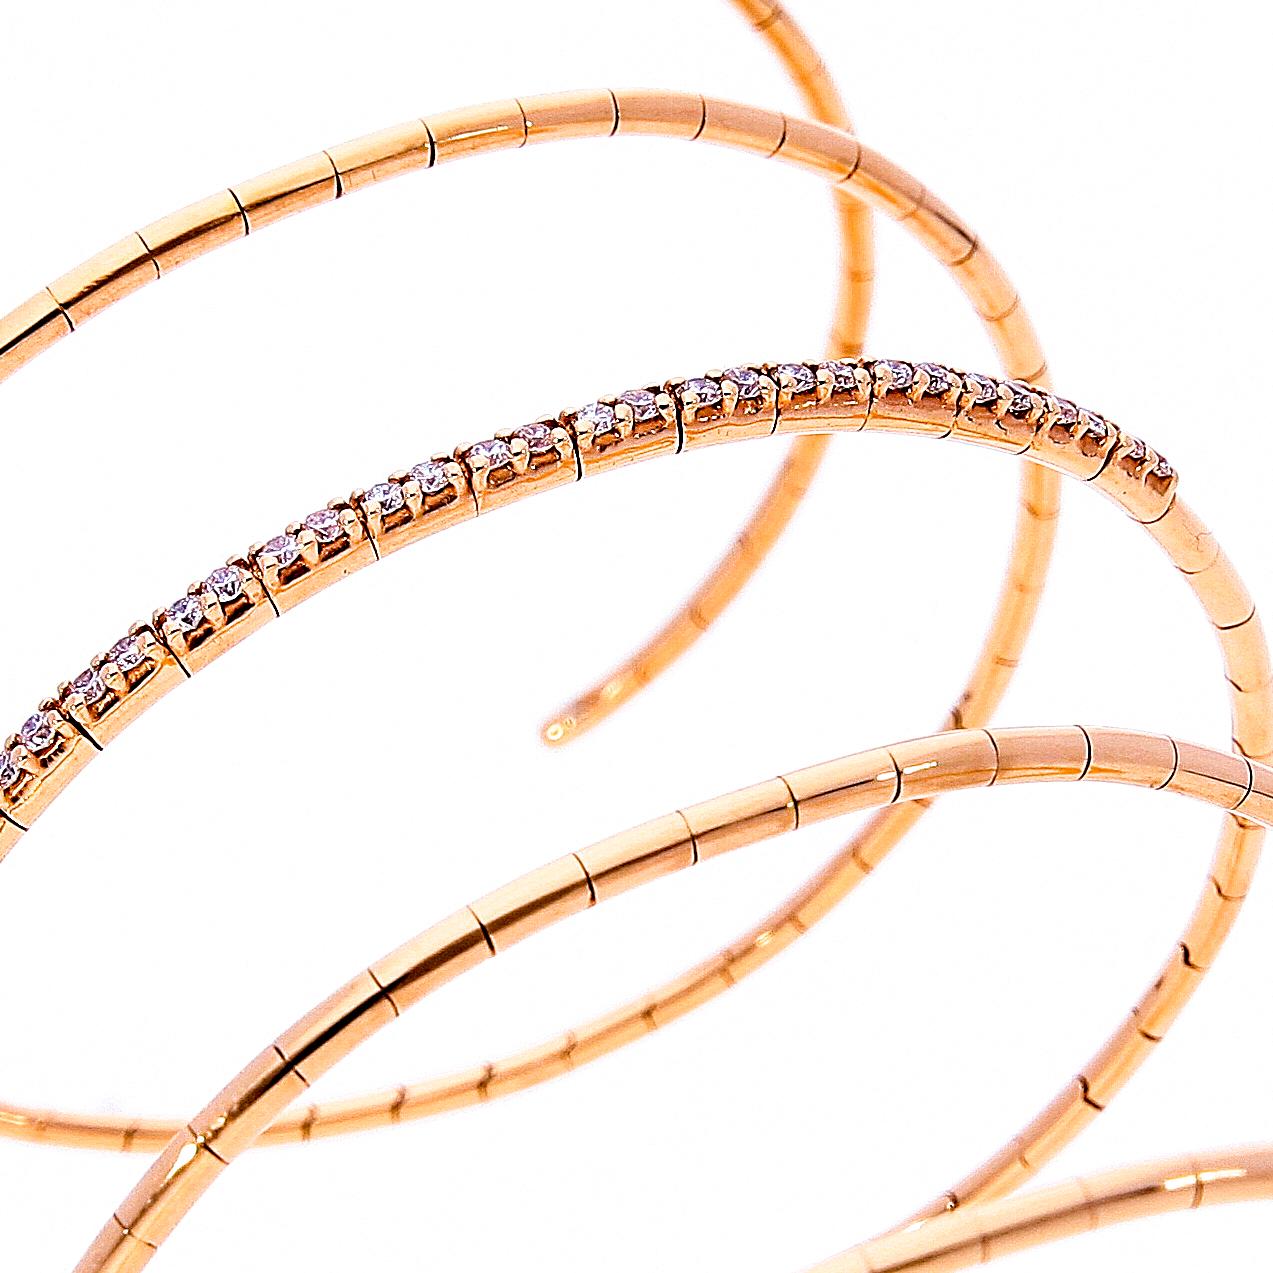 0.54 ct of Diamonds on 18 Kt Rose Gold Elastic Spiral Bracelet Made in Italy For Sale 2